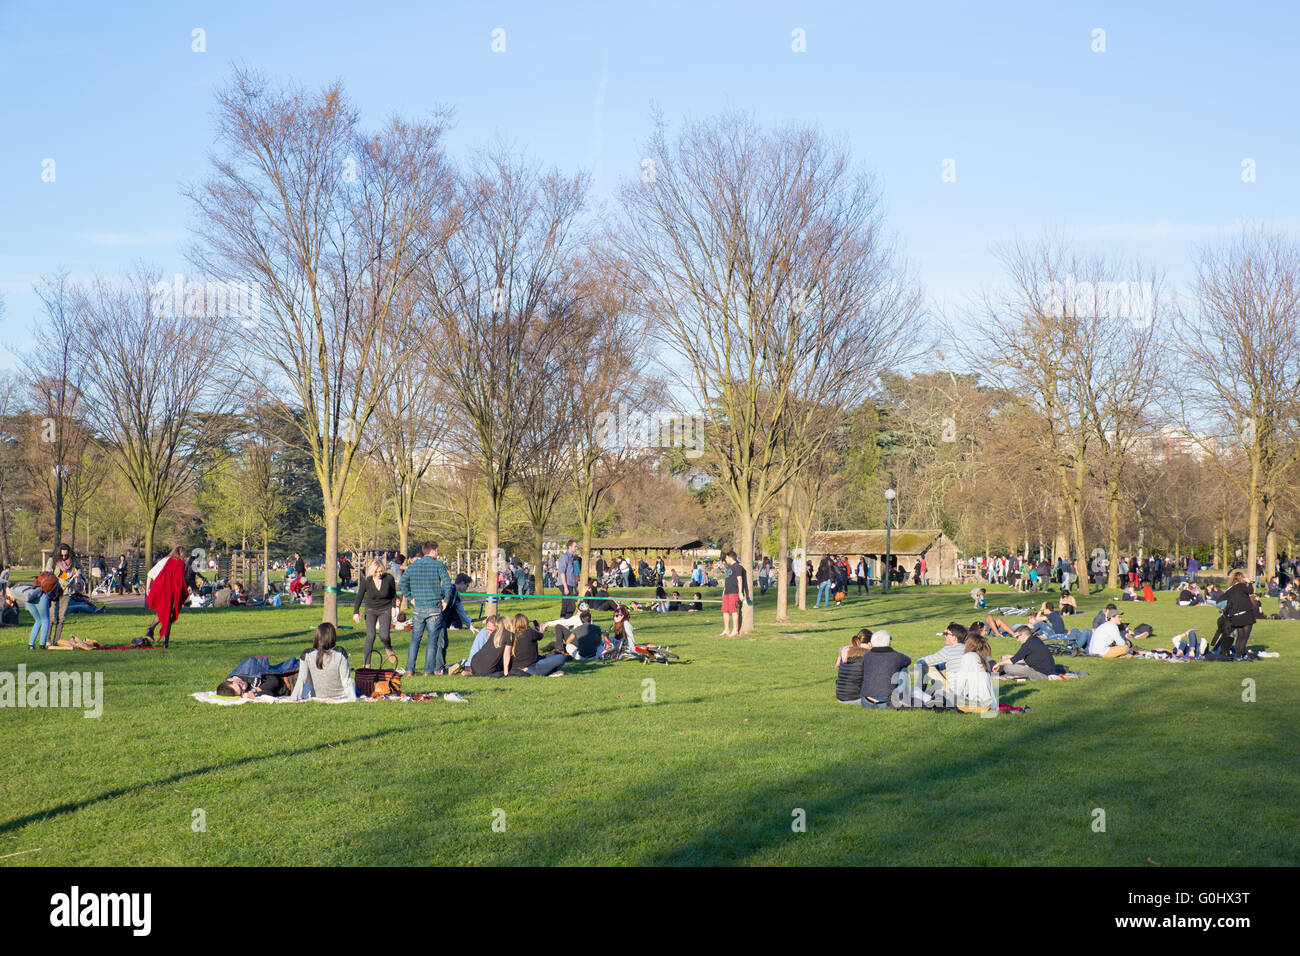 The crowded Parc de la Tete d'Or, a public park located in  the French city of Lyon, on the Easter weekend holiday. Stock Photo